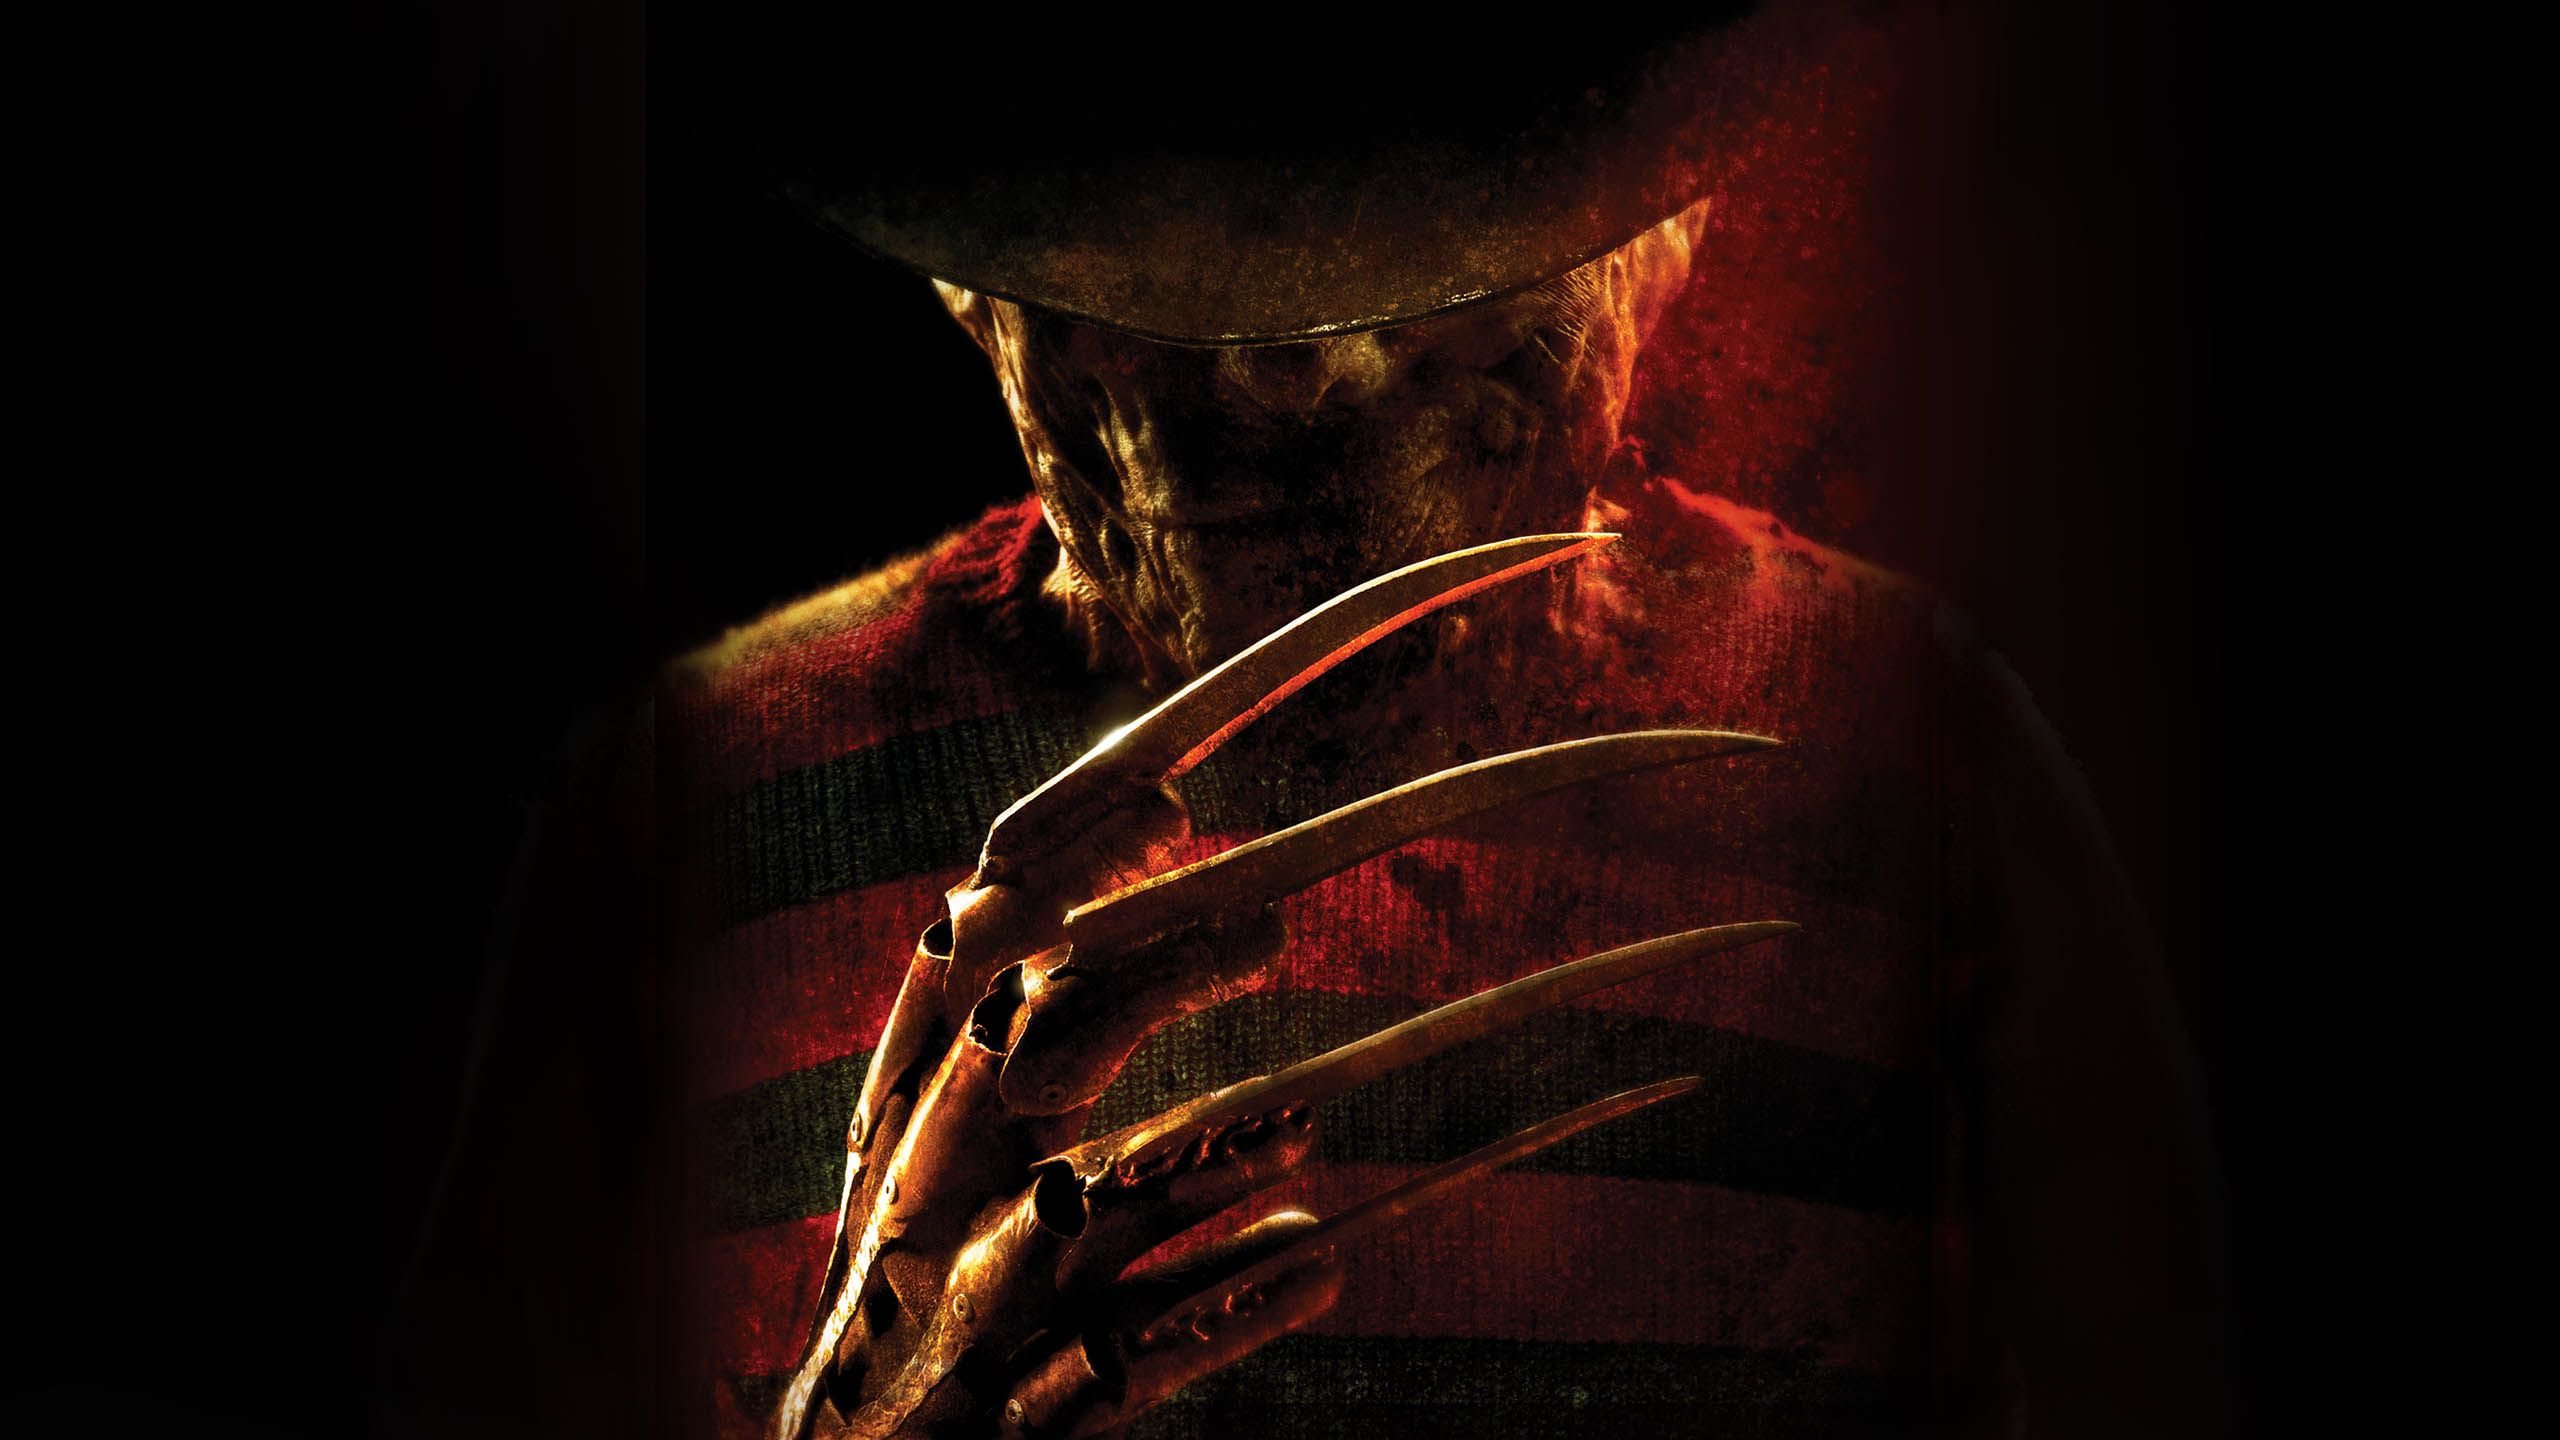 Freddy Krueger returns to everyone's nightmares in this contemporary r...